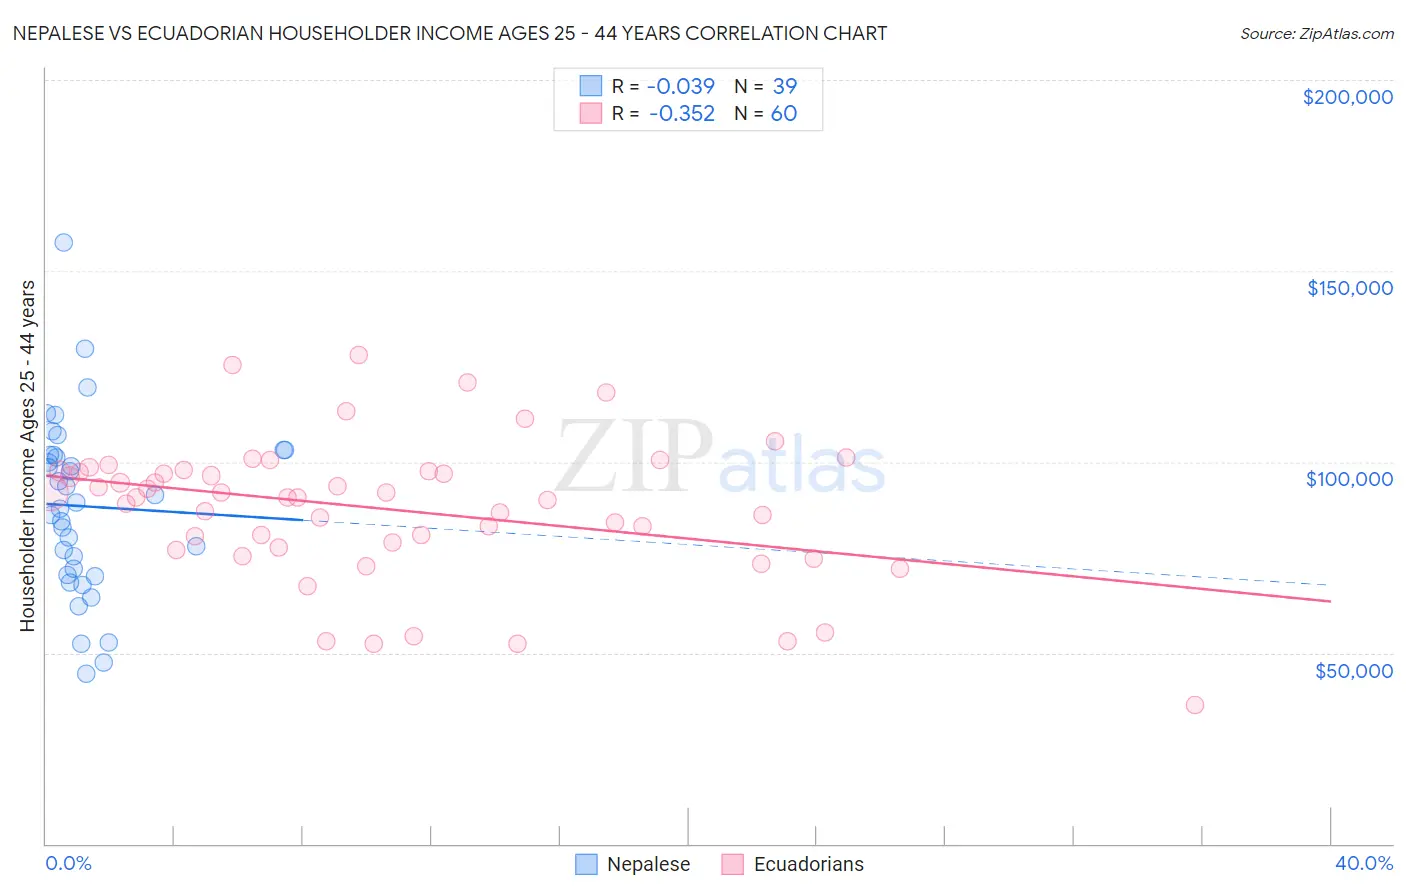 Nepalese vs Ecuadorian Householder Income Ages 25 - 44 years